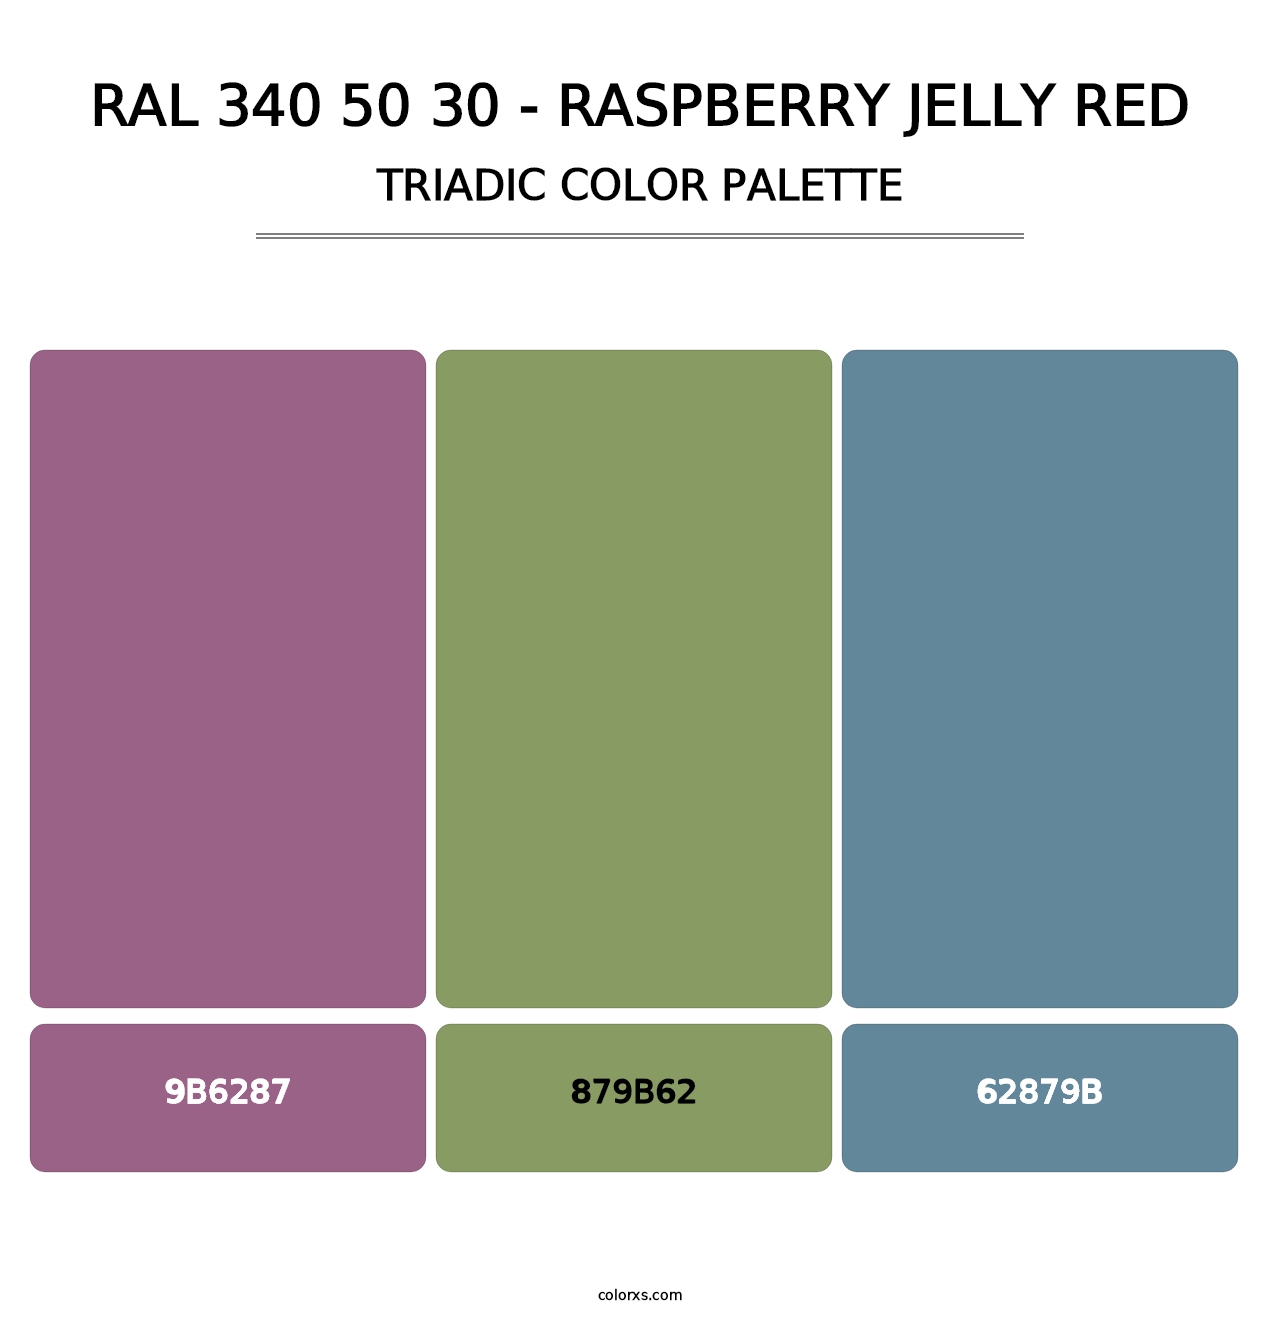 RAL 340 50 30 - Raspberry Jelly Red - Triadic Color Palette